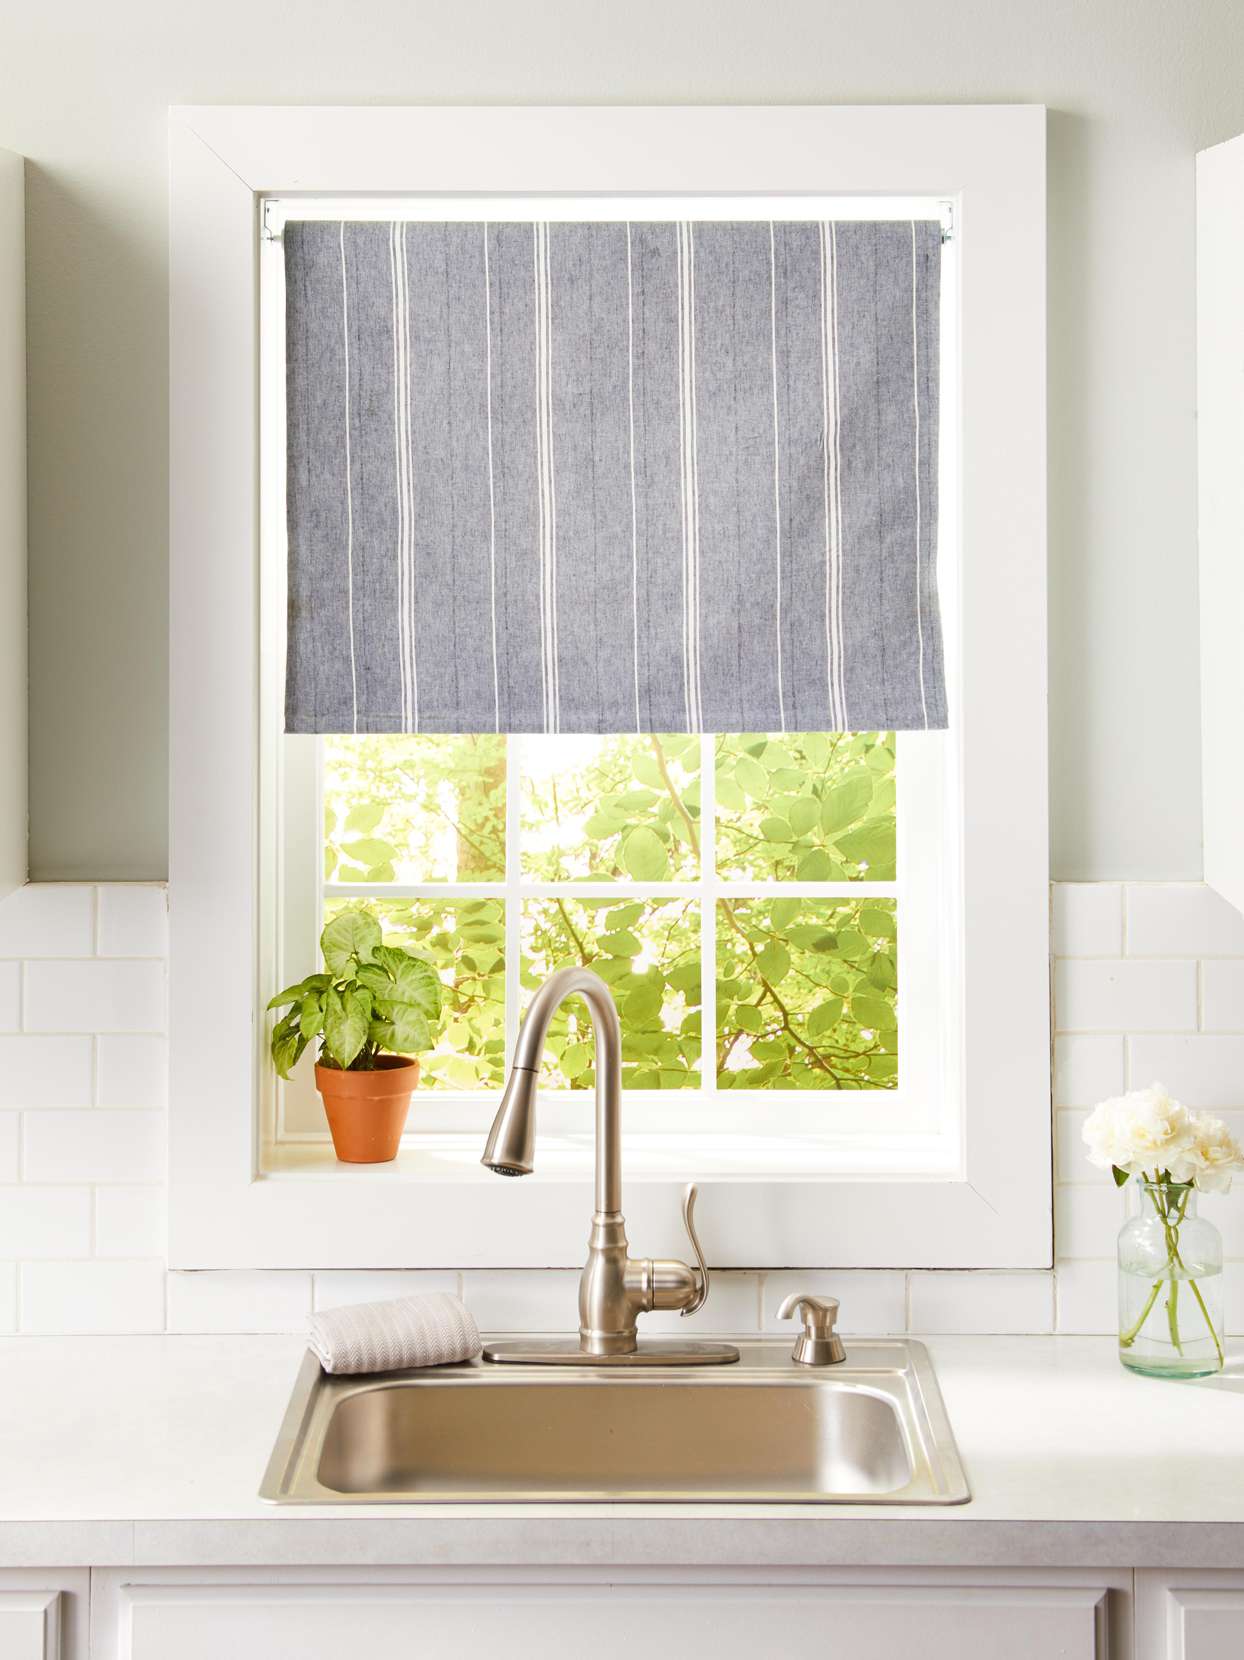 16 Diy Kitchen Window Treatments For An Easy Refresh Better Homes Gardens